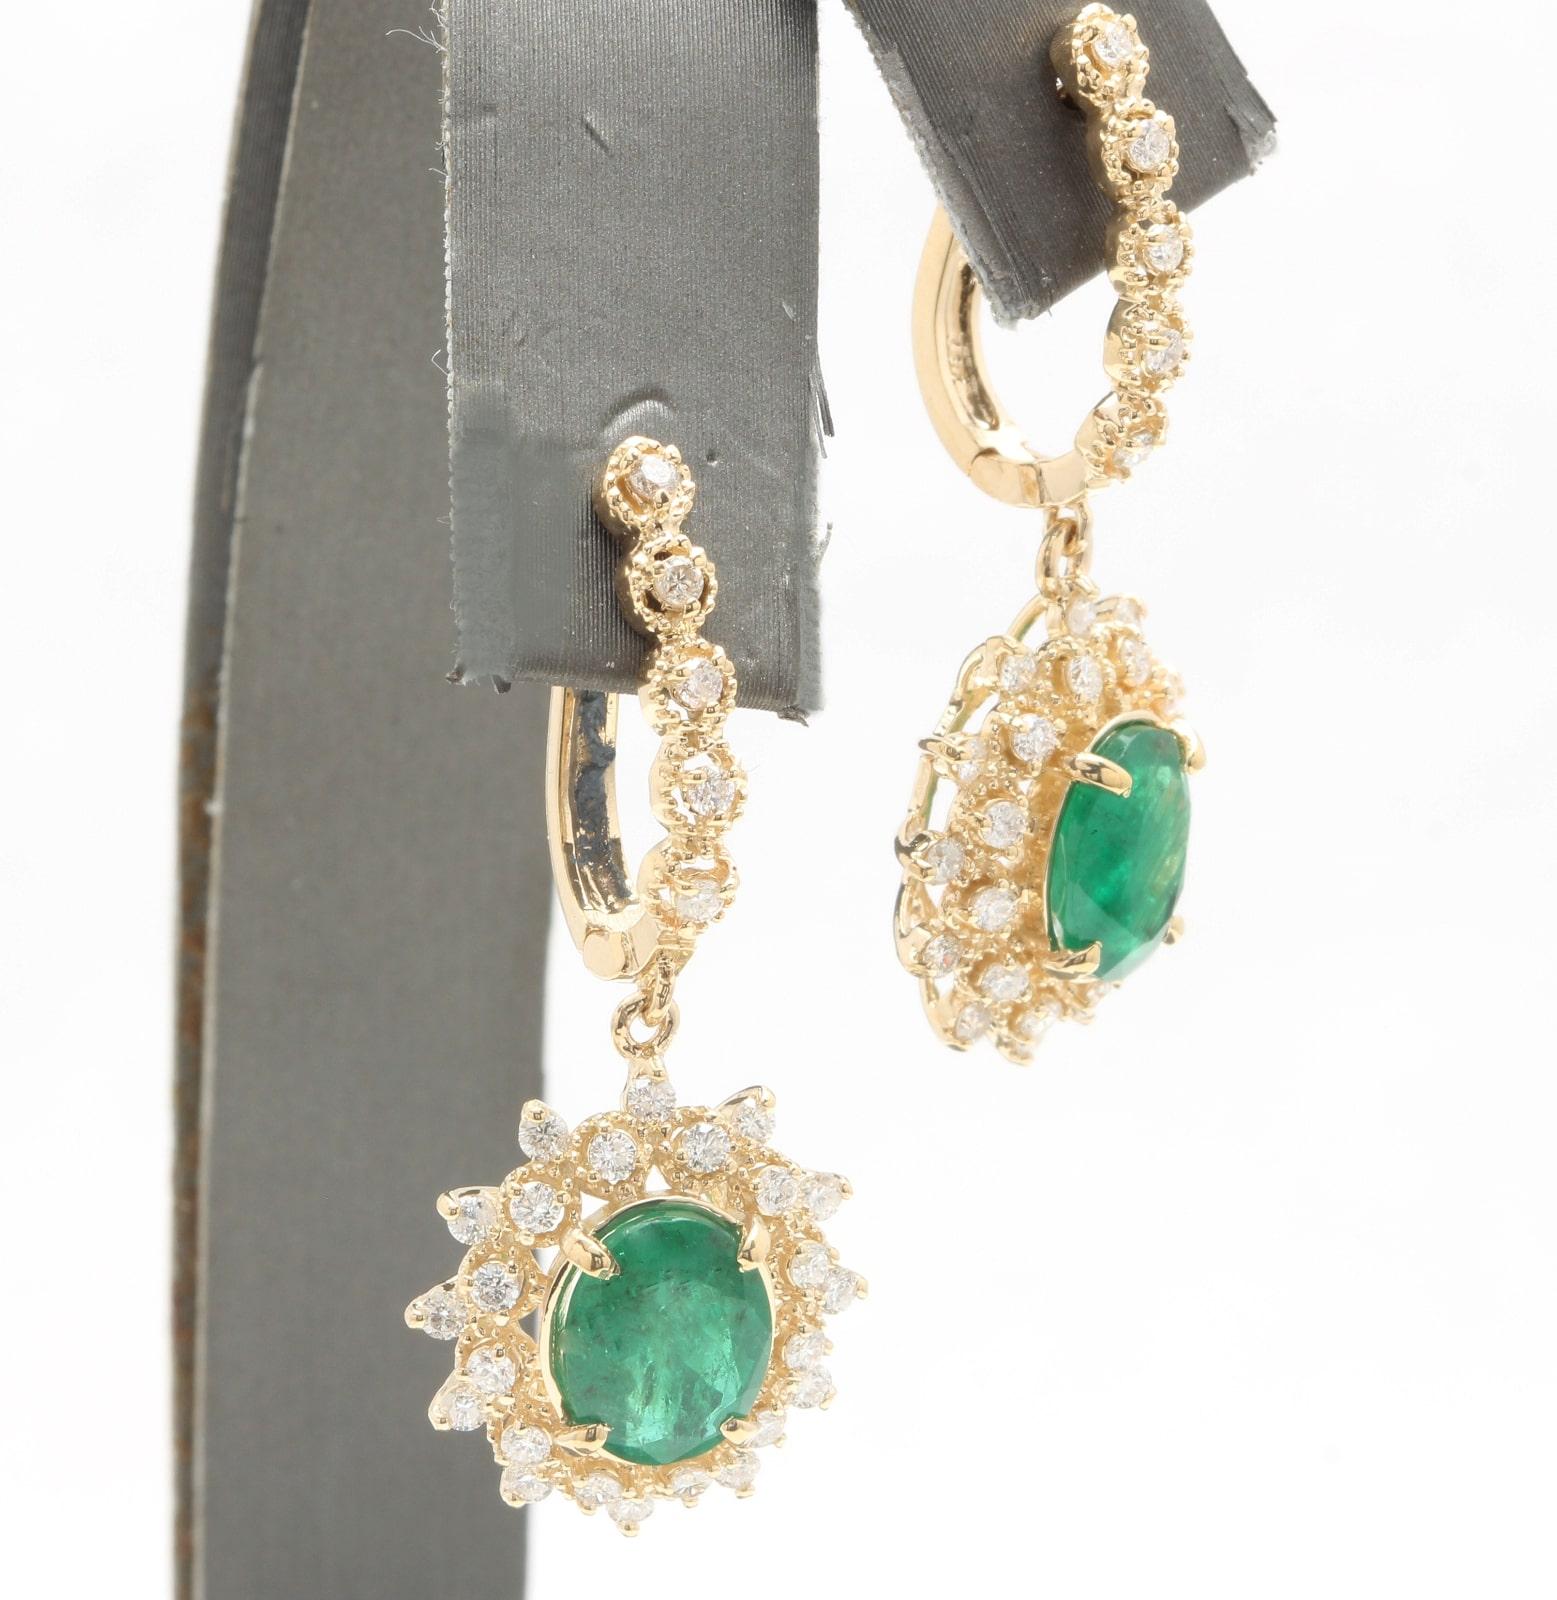 5.20 Carats Natural Emerald and Diamond 14K Solid Yellow Gold Earrings

Amazing looking piece! 

Suggested Replacement Value Approx. $8,000.00

Total Natural Round Cut White Diamonds Weight: Approx. 1.40 Carats (color G-H / Clarity SI1-SI2)

Total